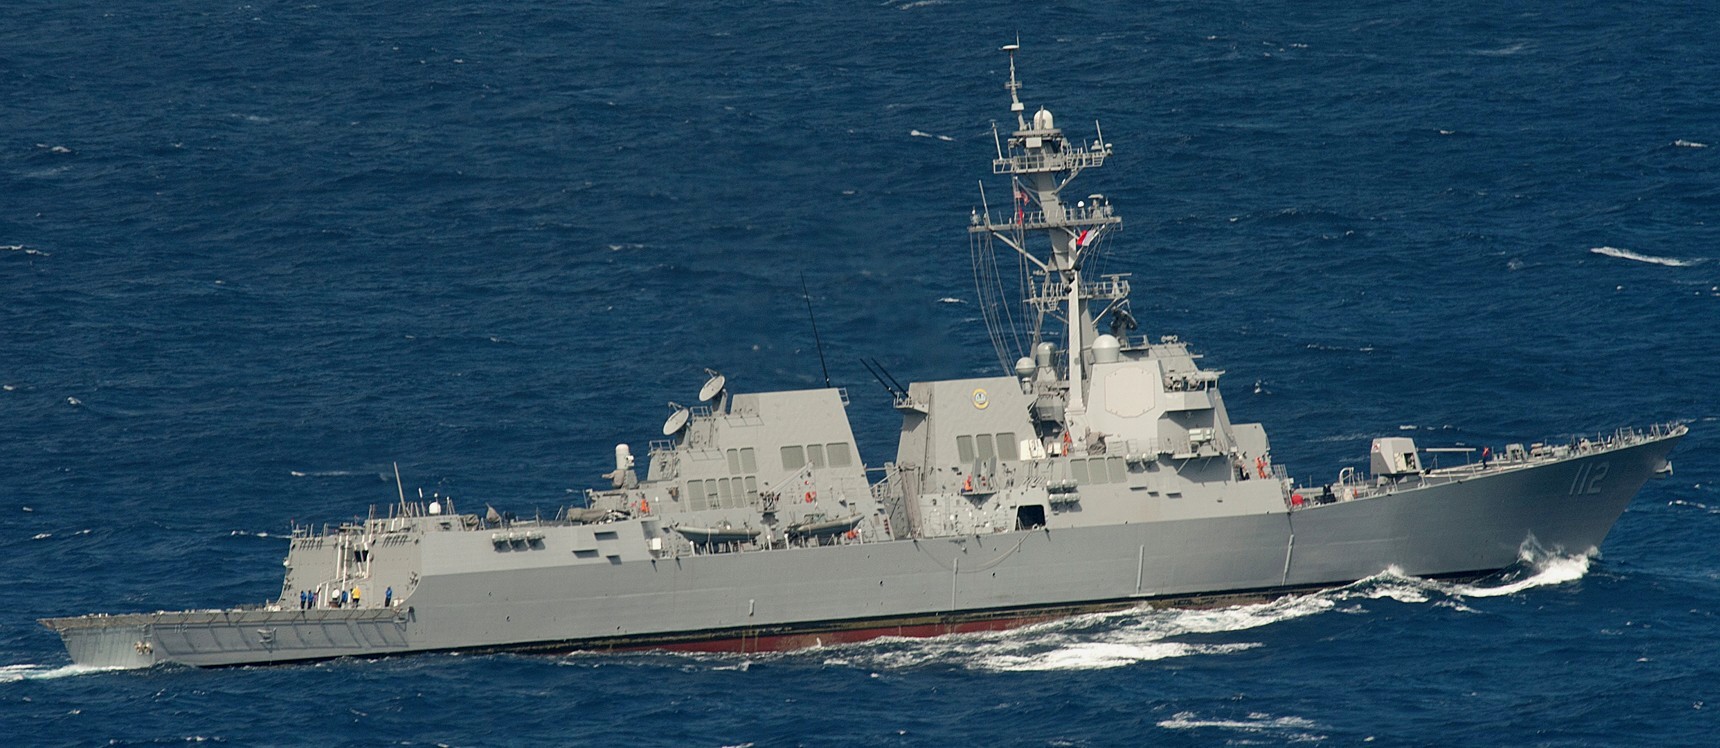 ddg-112 uss michael murphy arleigh burke class guided missile destroyer aegis us navy 53p